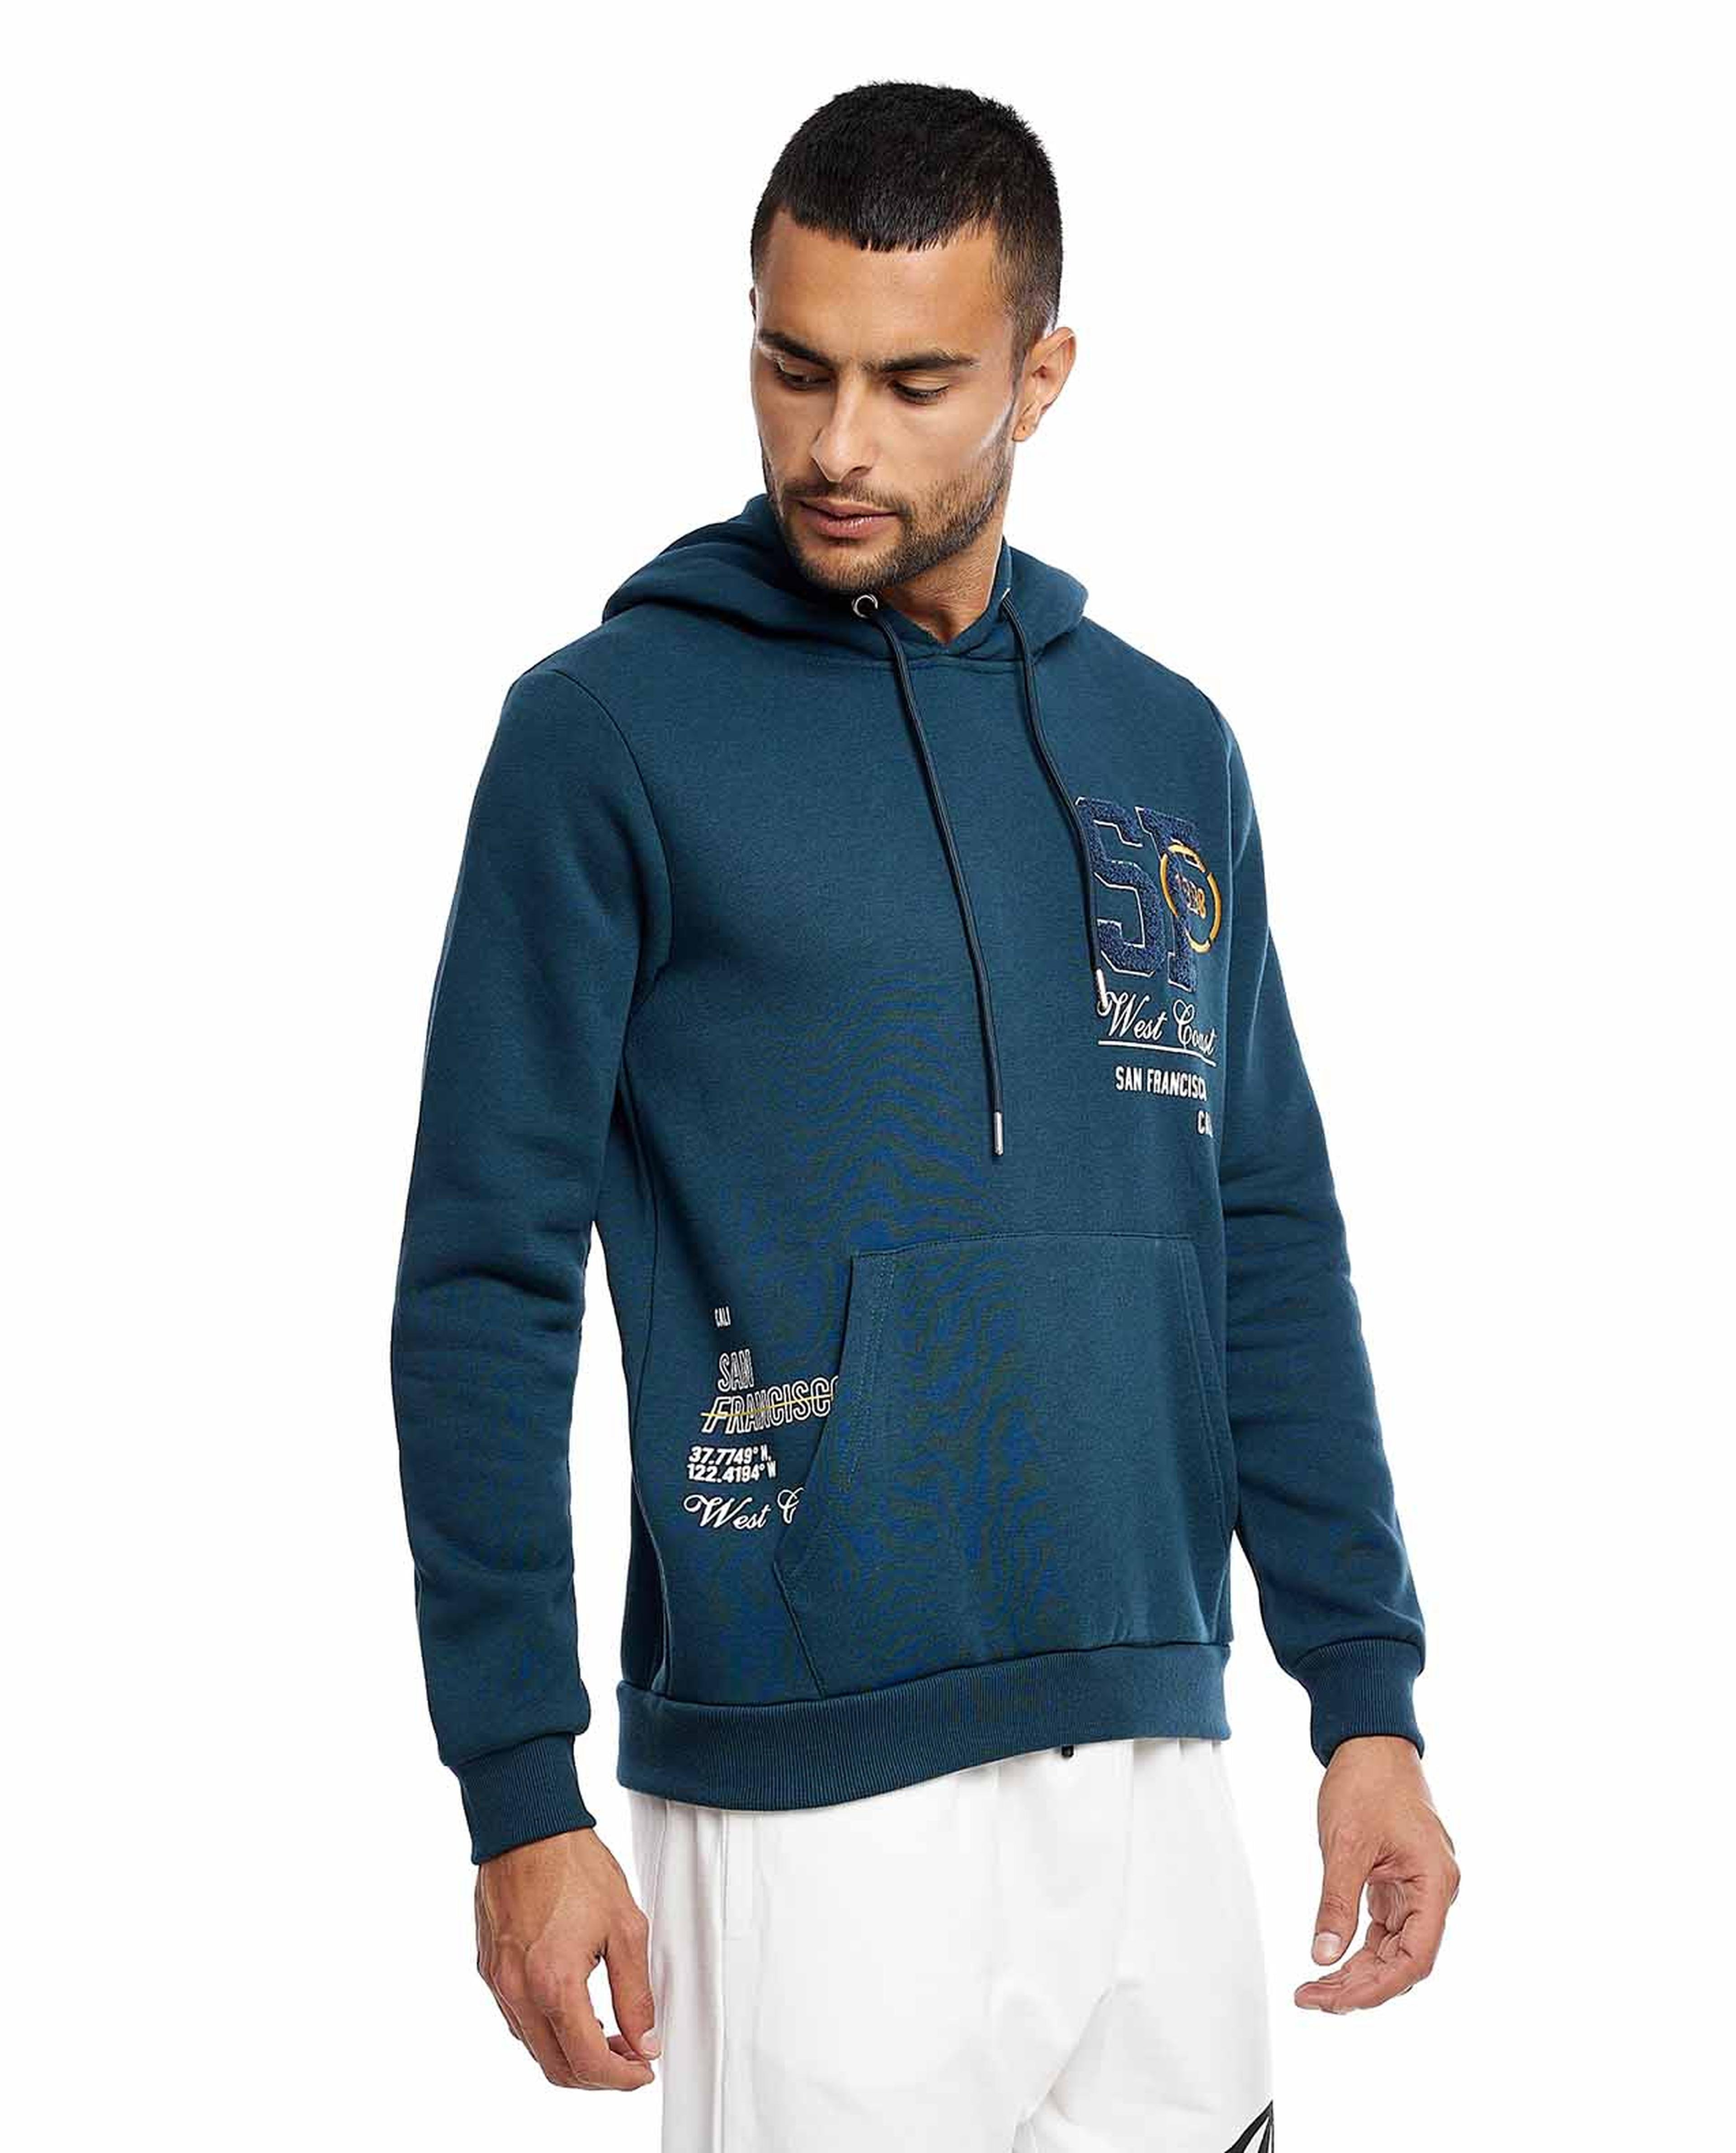 Applique Detail Hoodie with Long Sleeves